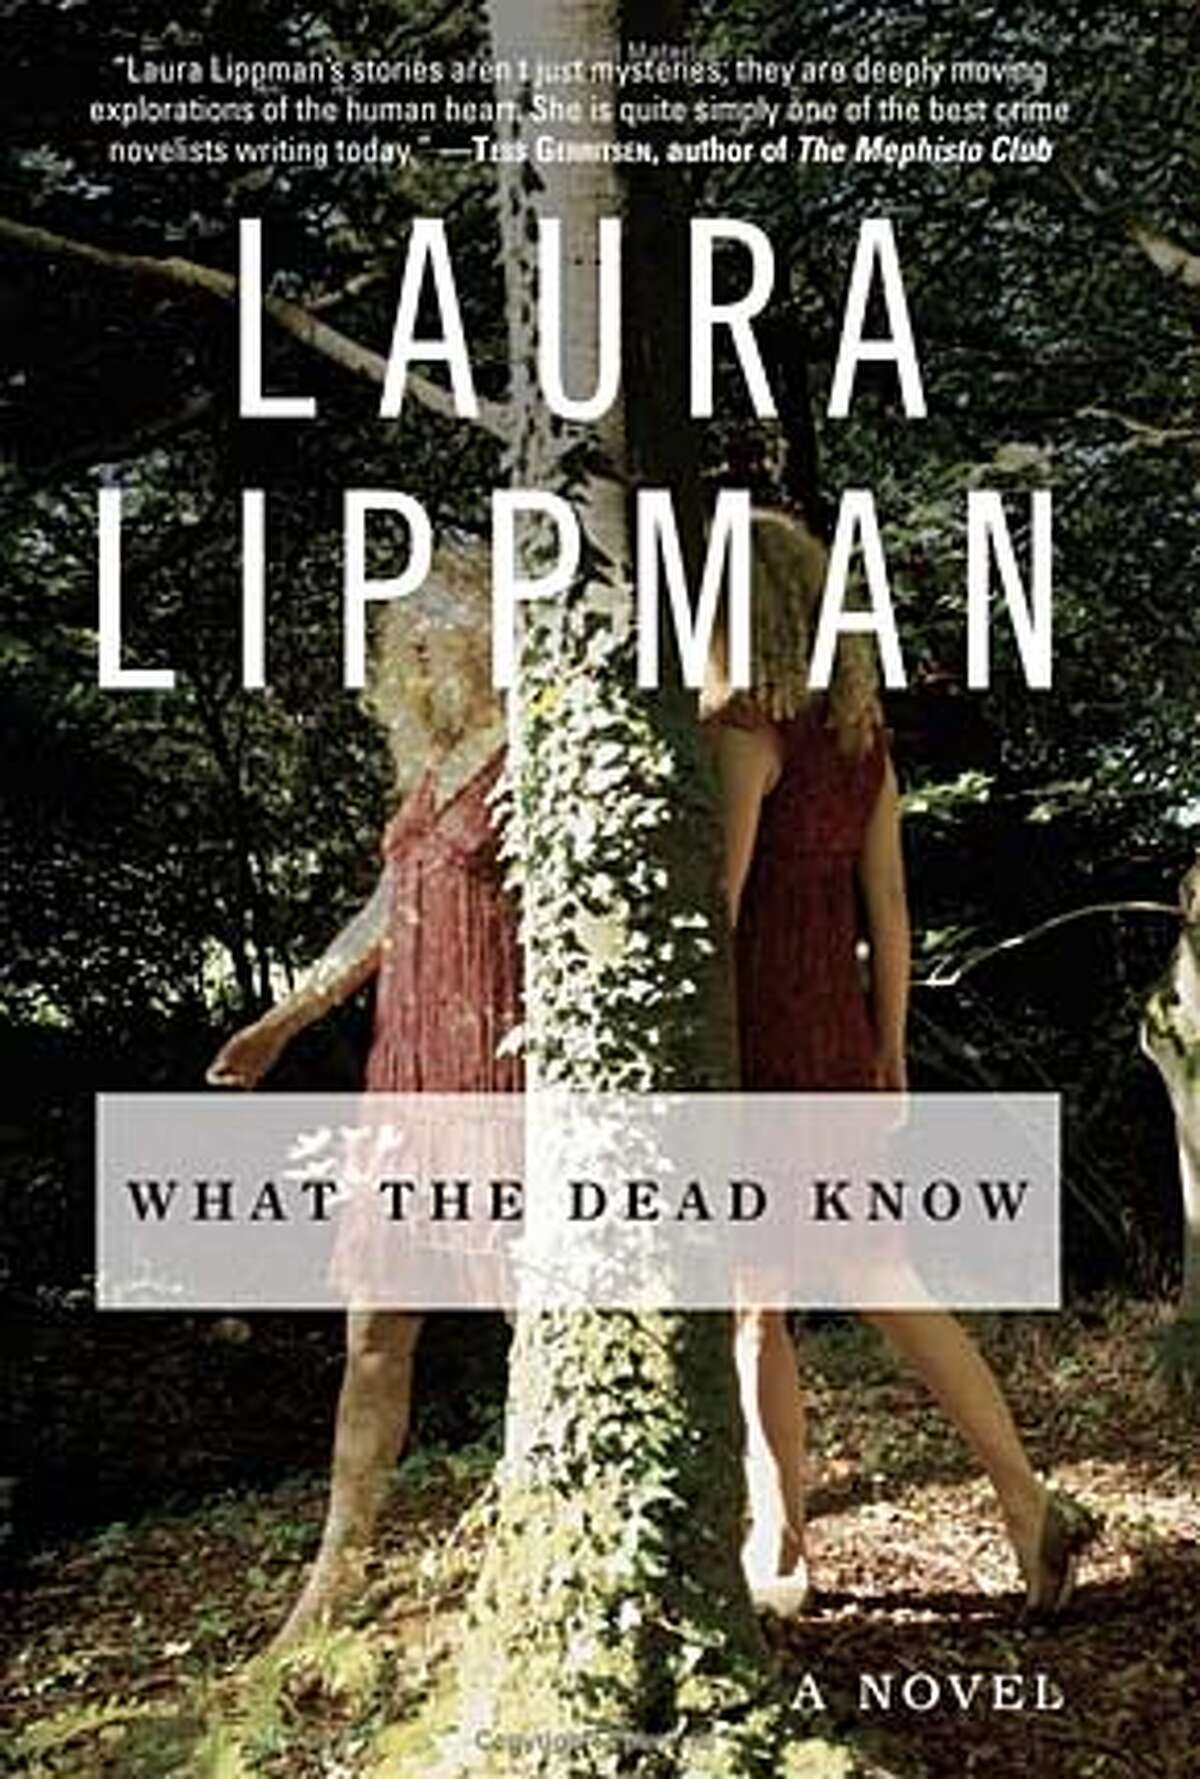 "What the Dead Know" by Laura Lippman